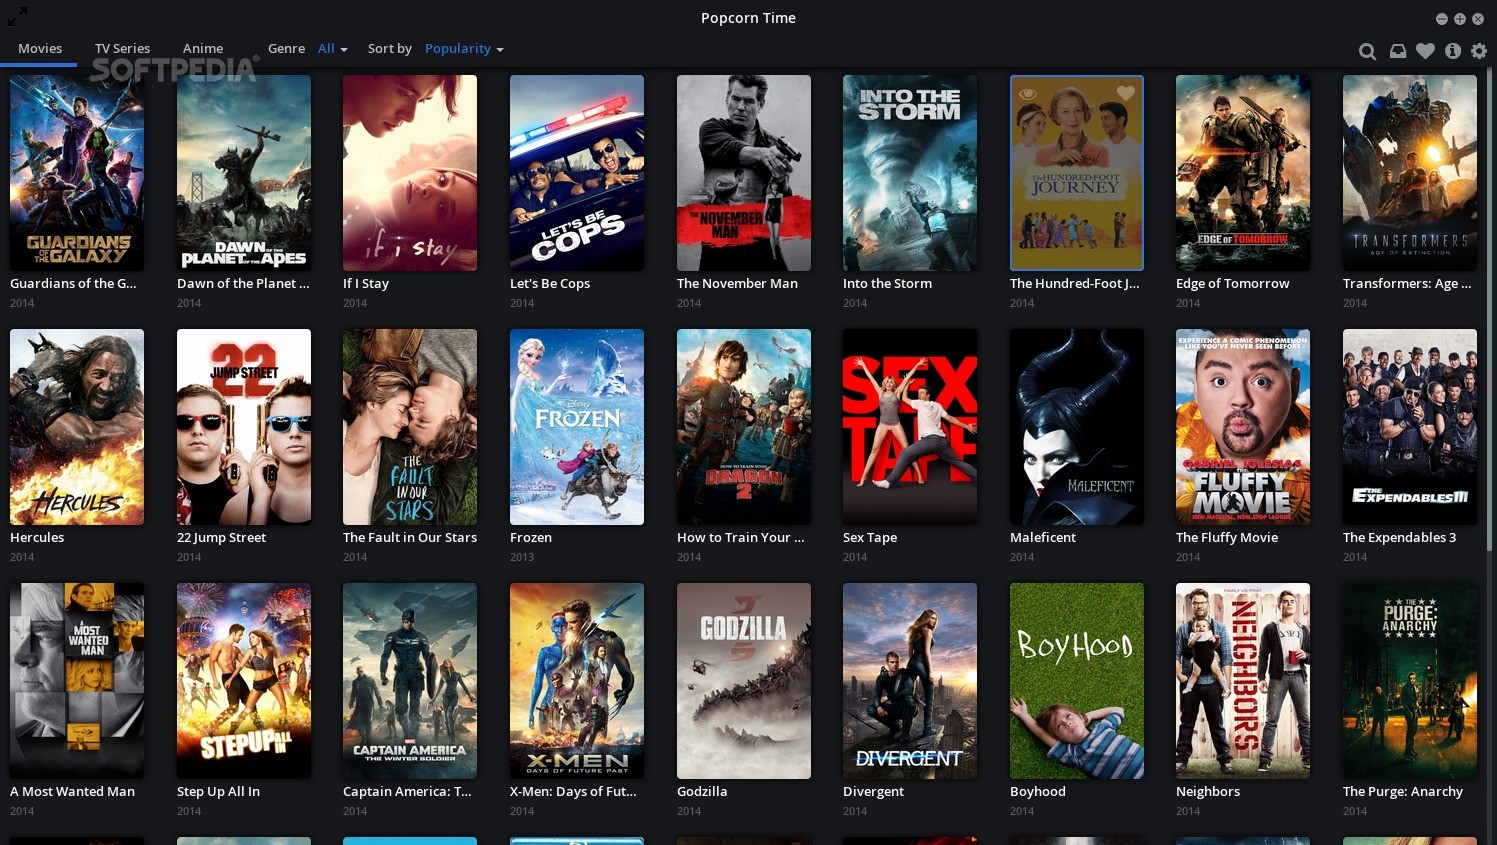 Popcorn time movie download can t be located